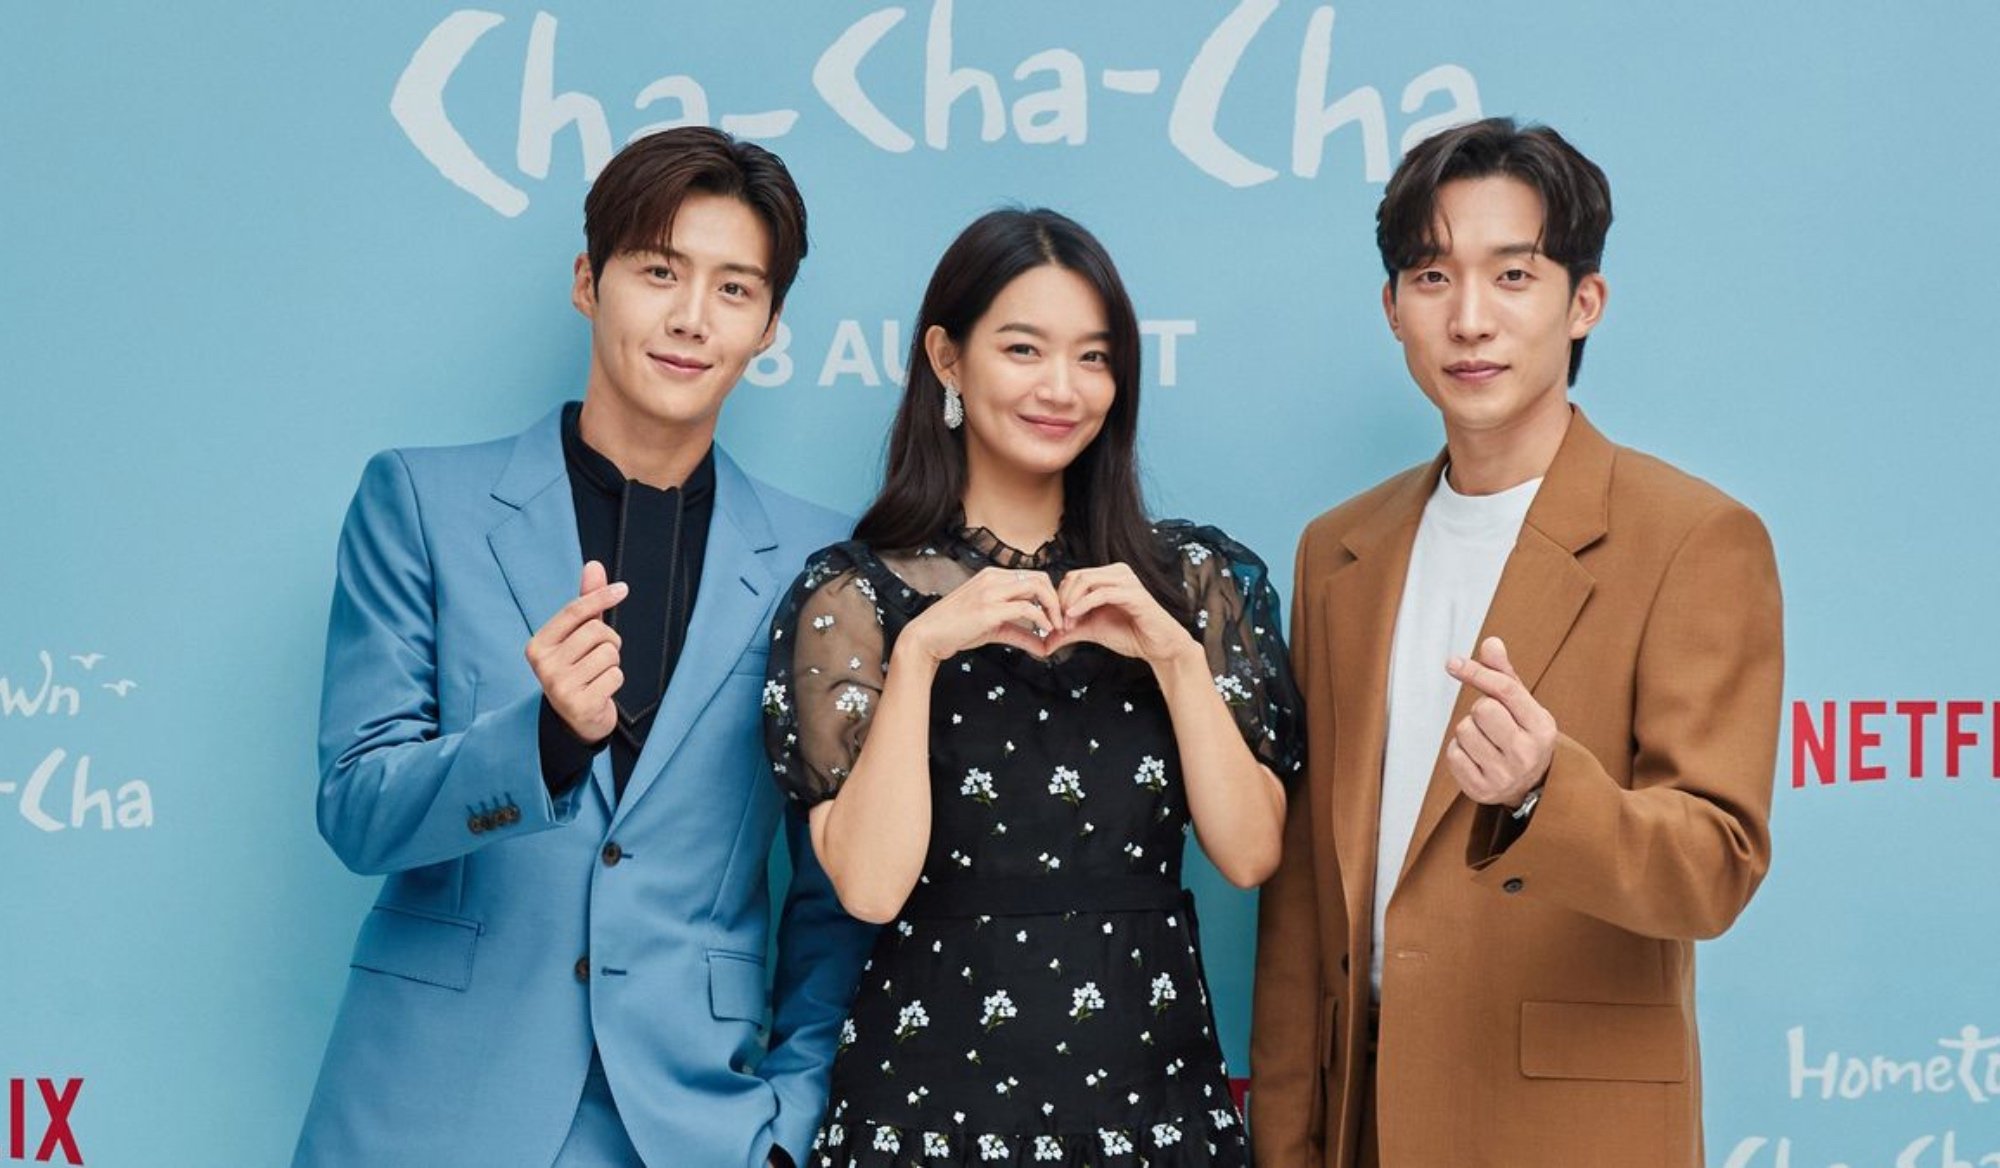 Hometown Cha-Cha-Cha': Love-Triangle Has Fans Rooting for Both